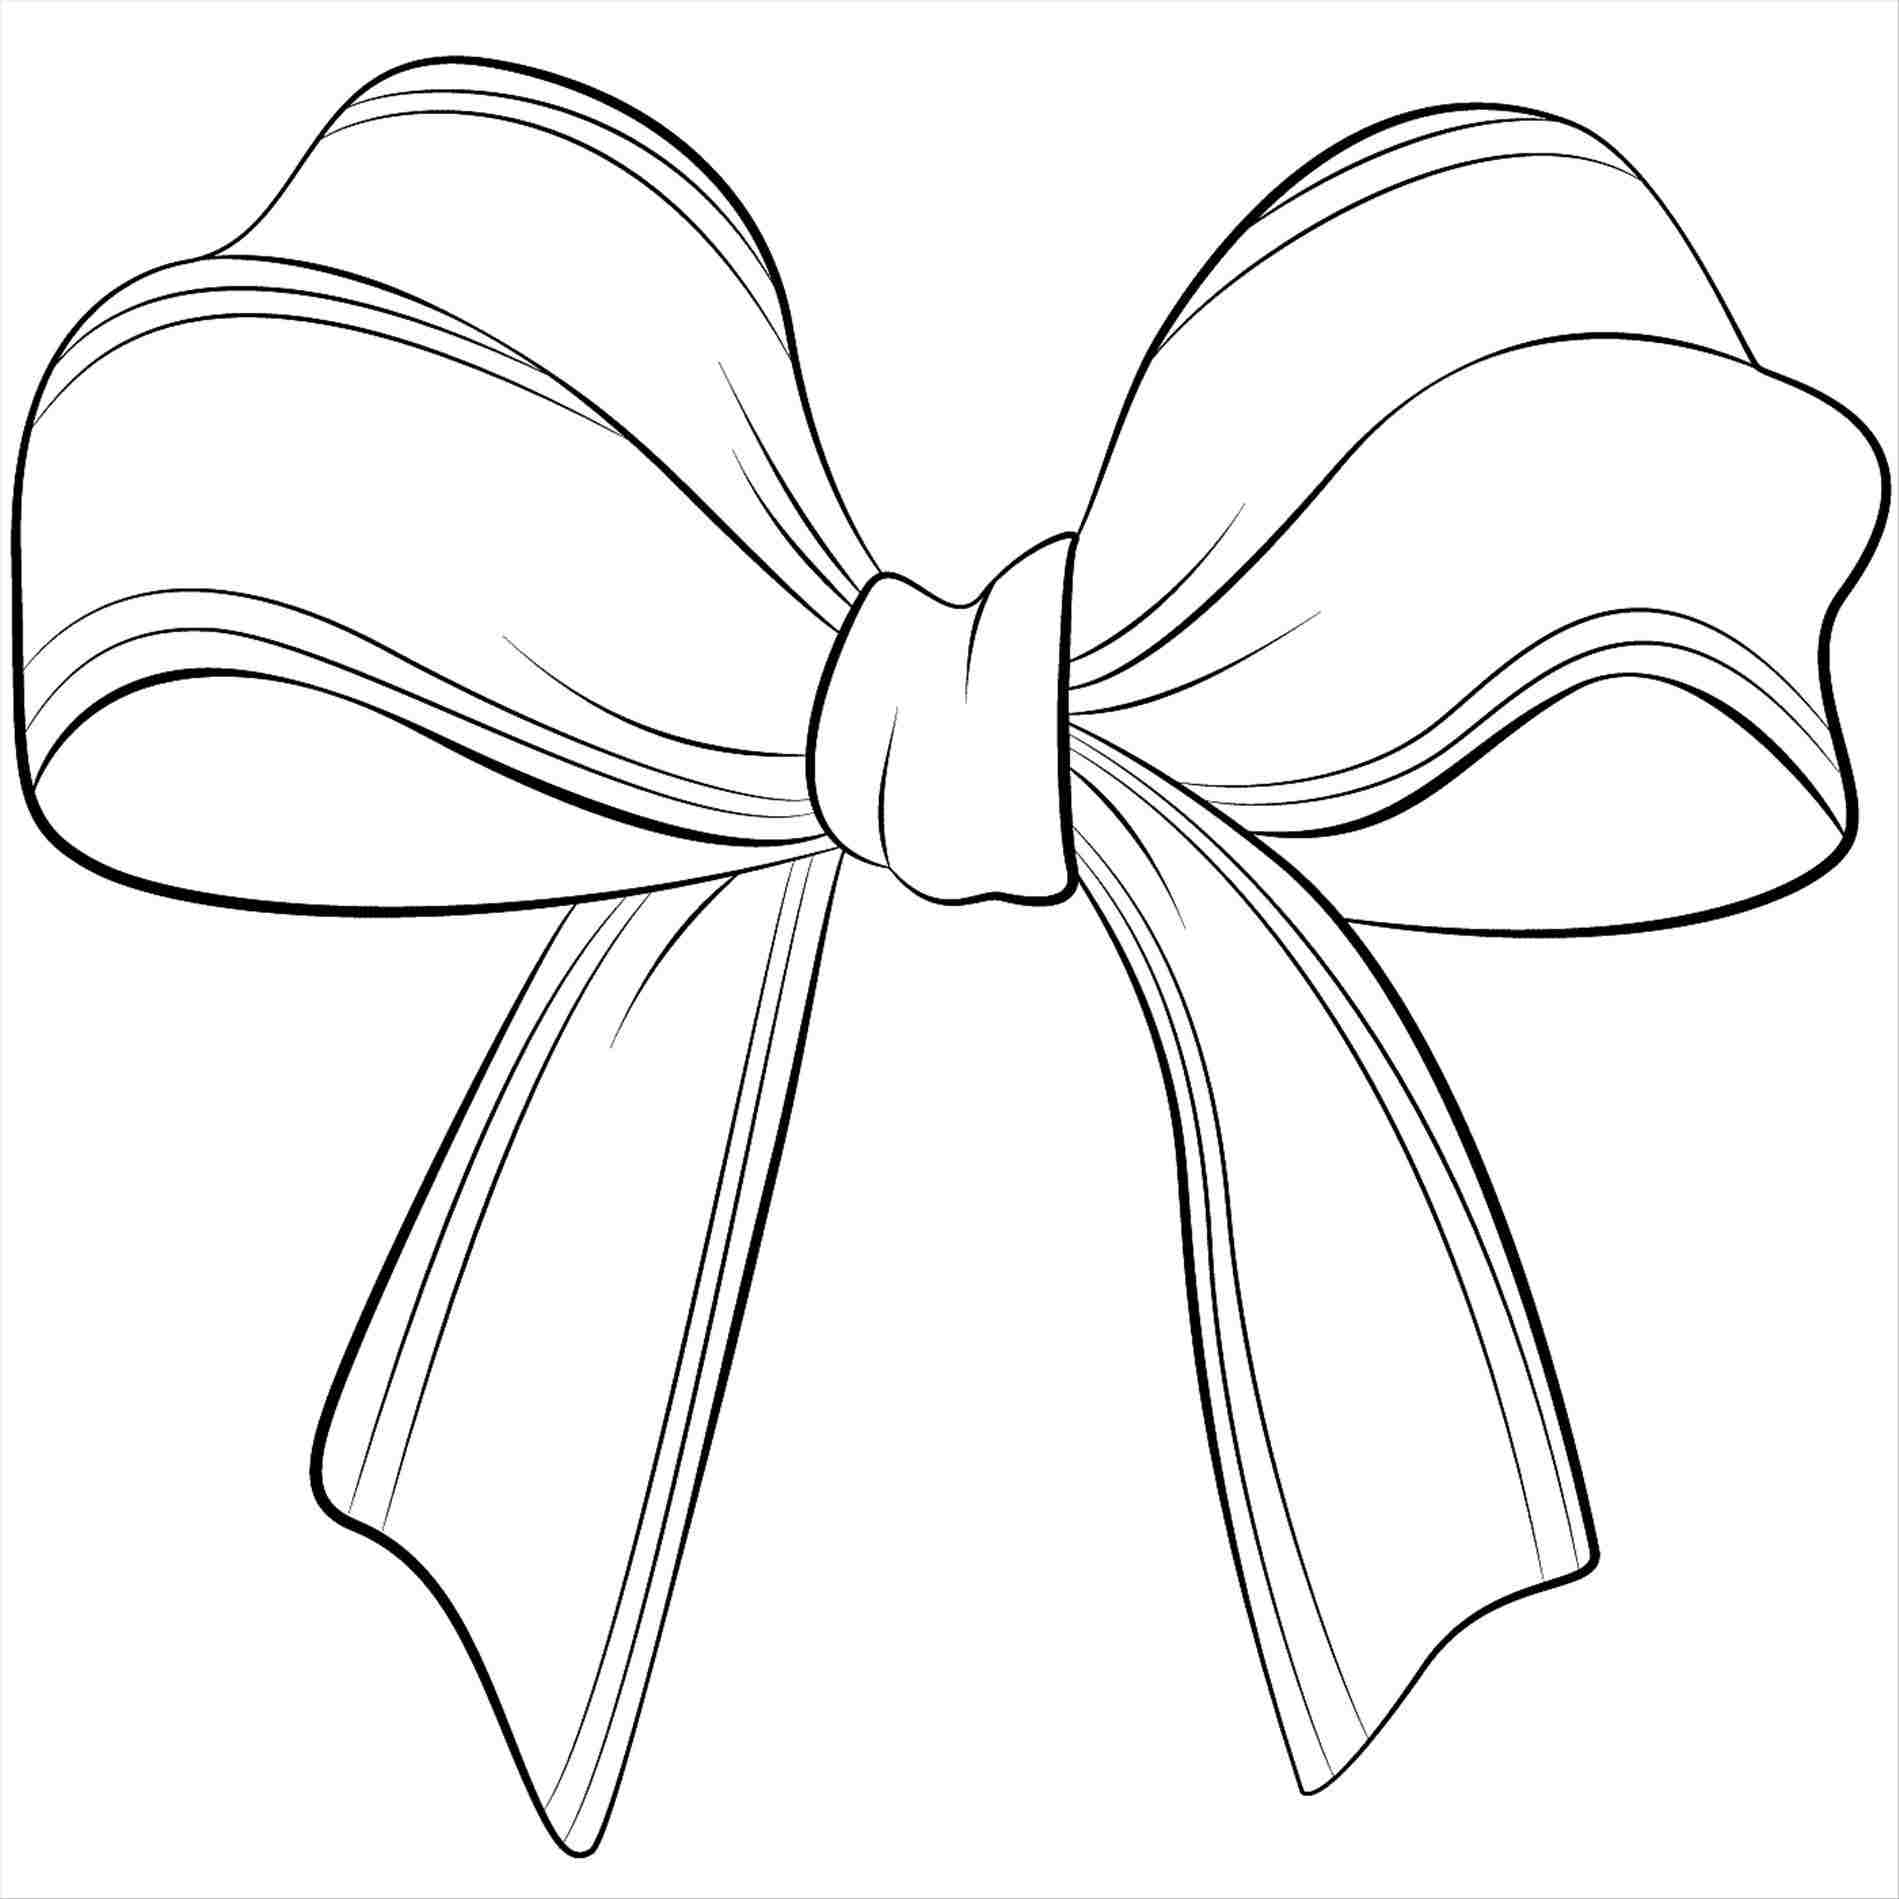 Cheer Bow Outline Drawing Sketch Coloring Page